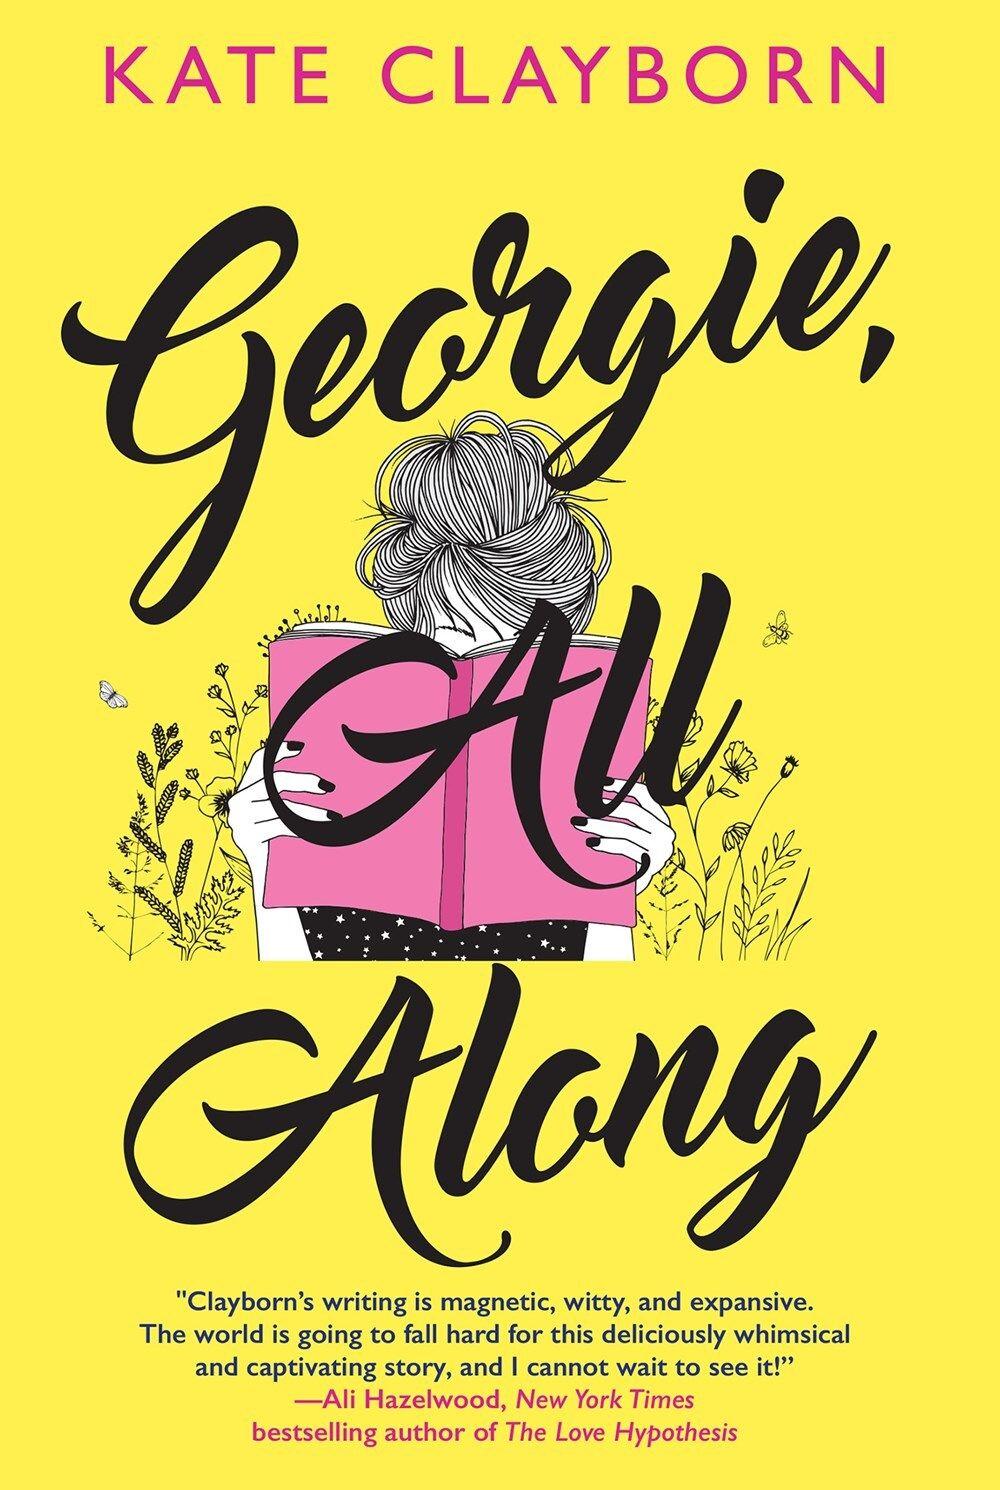 Georgie, All Along is the newest novel by author Kate Clayborn